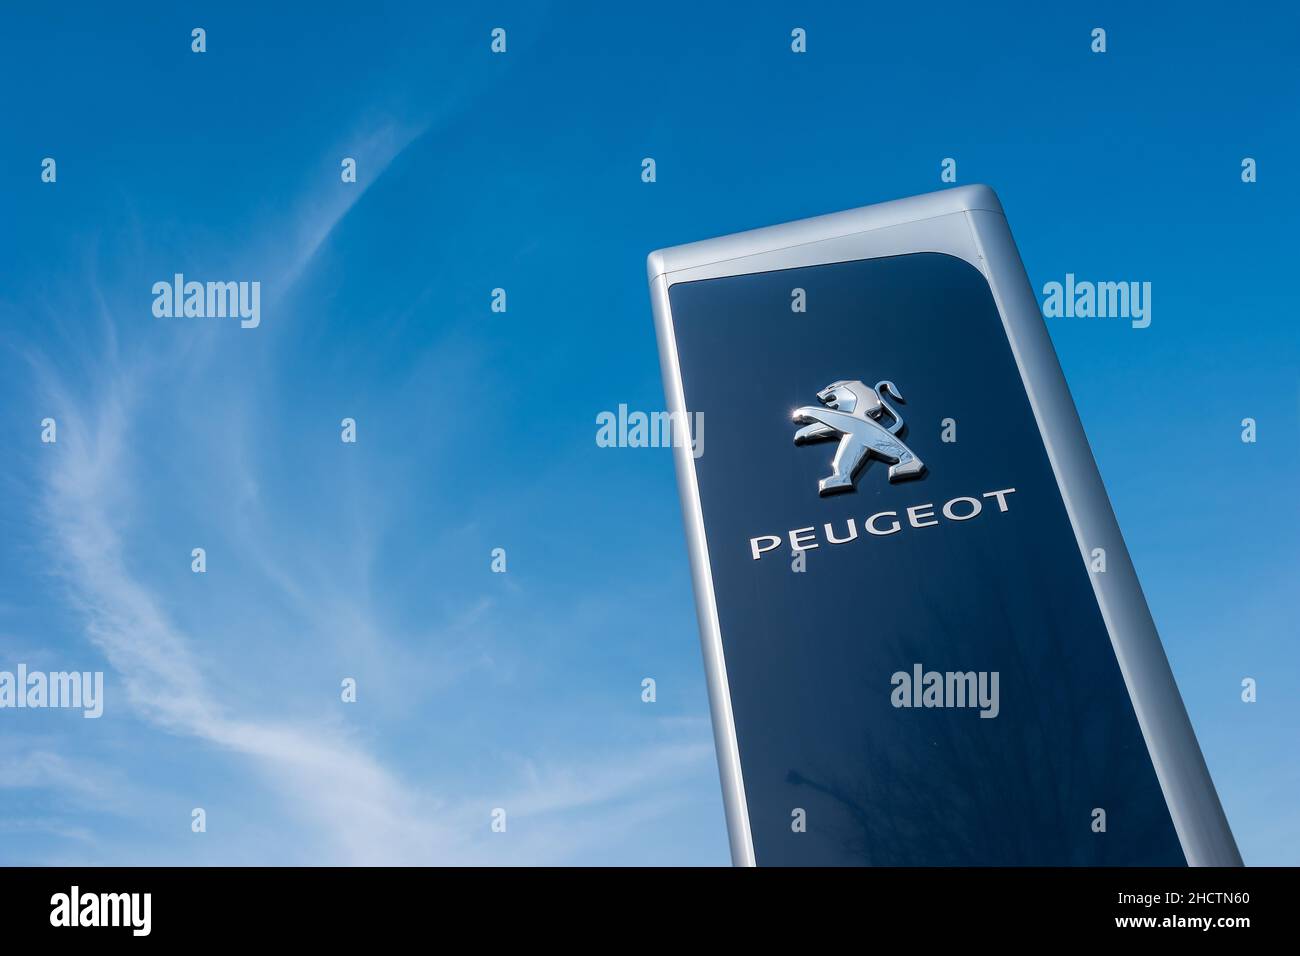 Peugeot dealership sign against blue sky. Peugeot is a French automobile manufacturer and part of Groupe PSA. Stock Photo